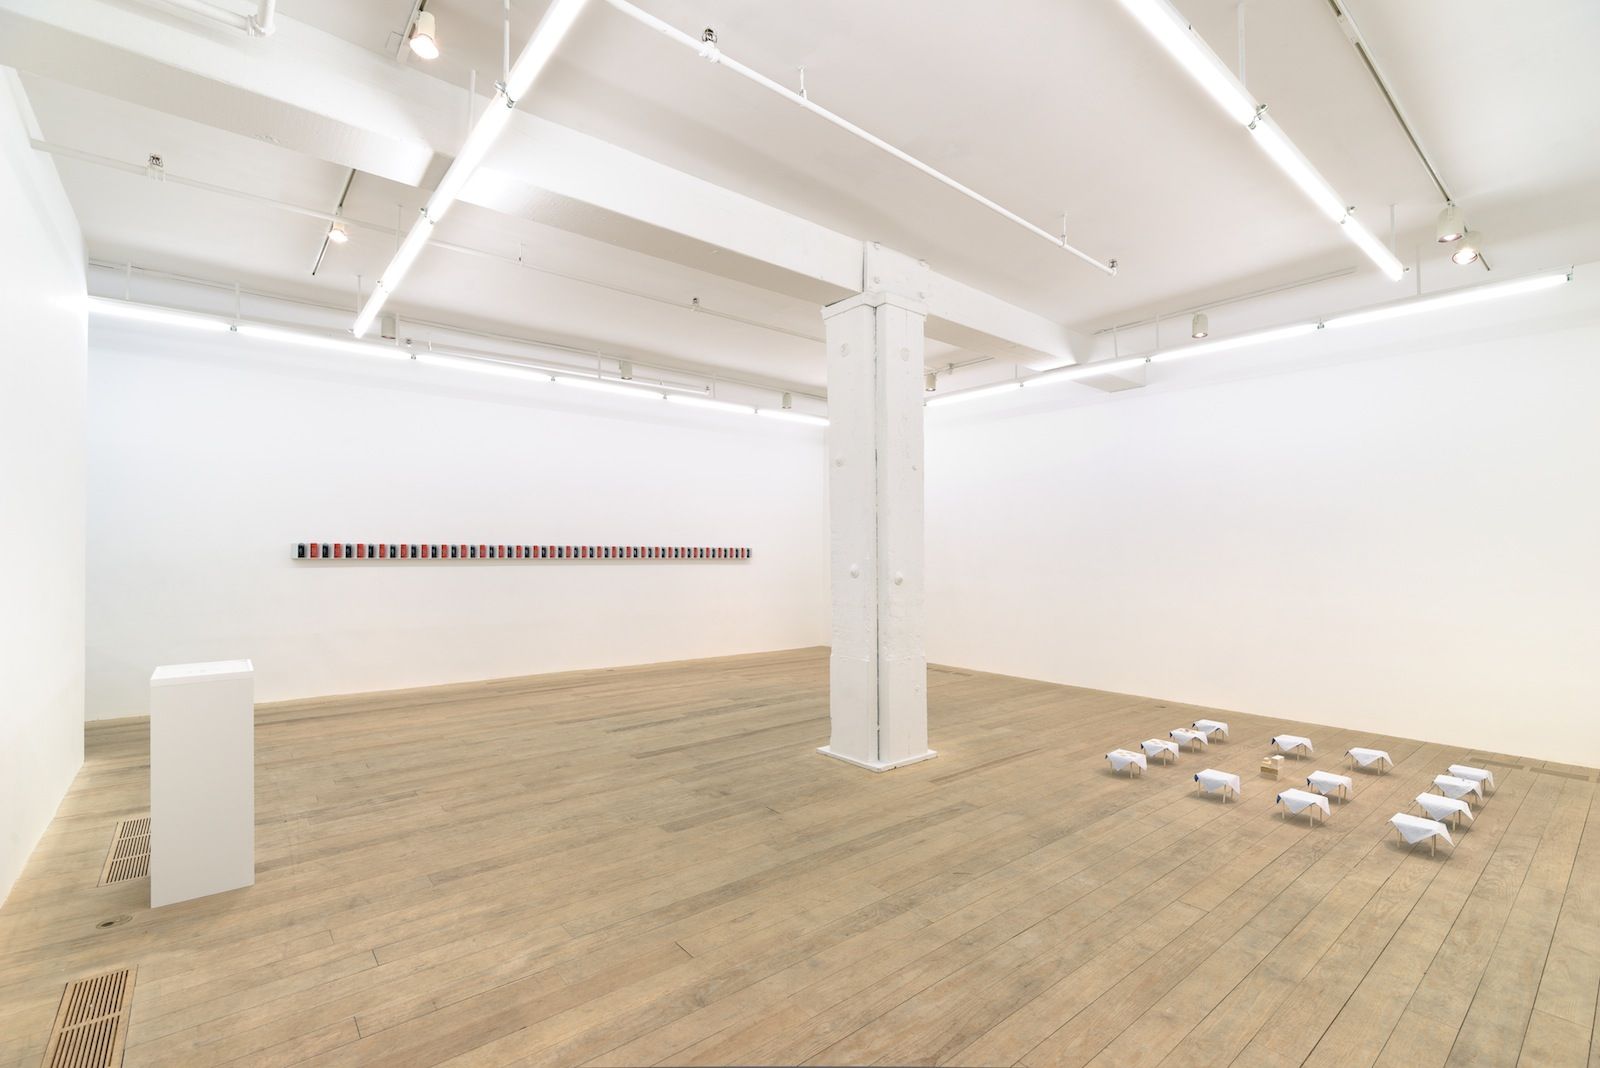 Objects & Thin Air, 2014, installation view, Foxy Production, New York